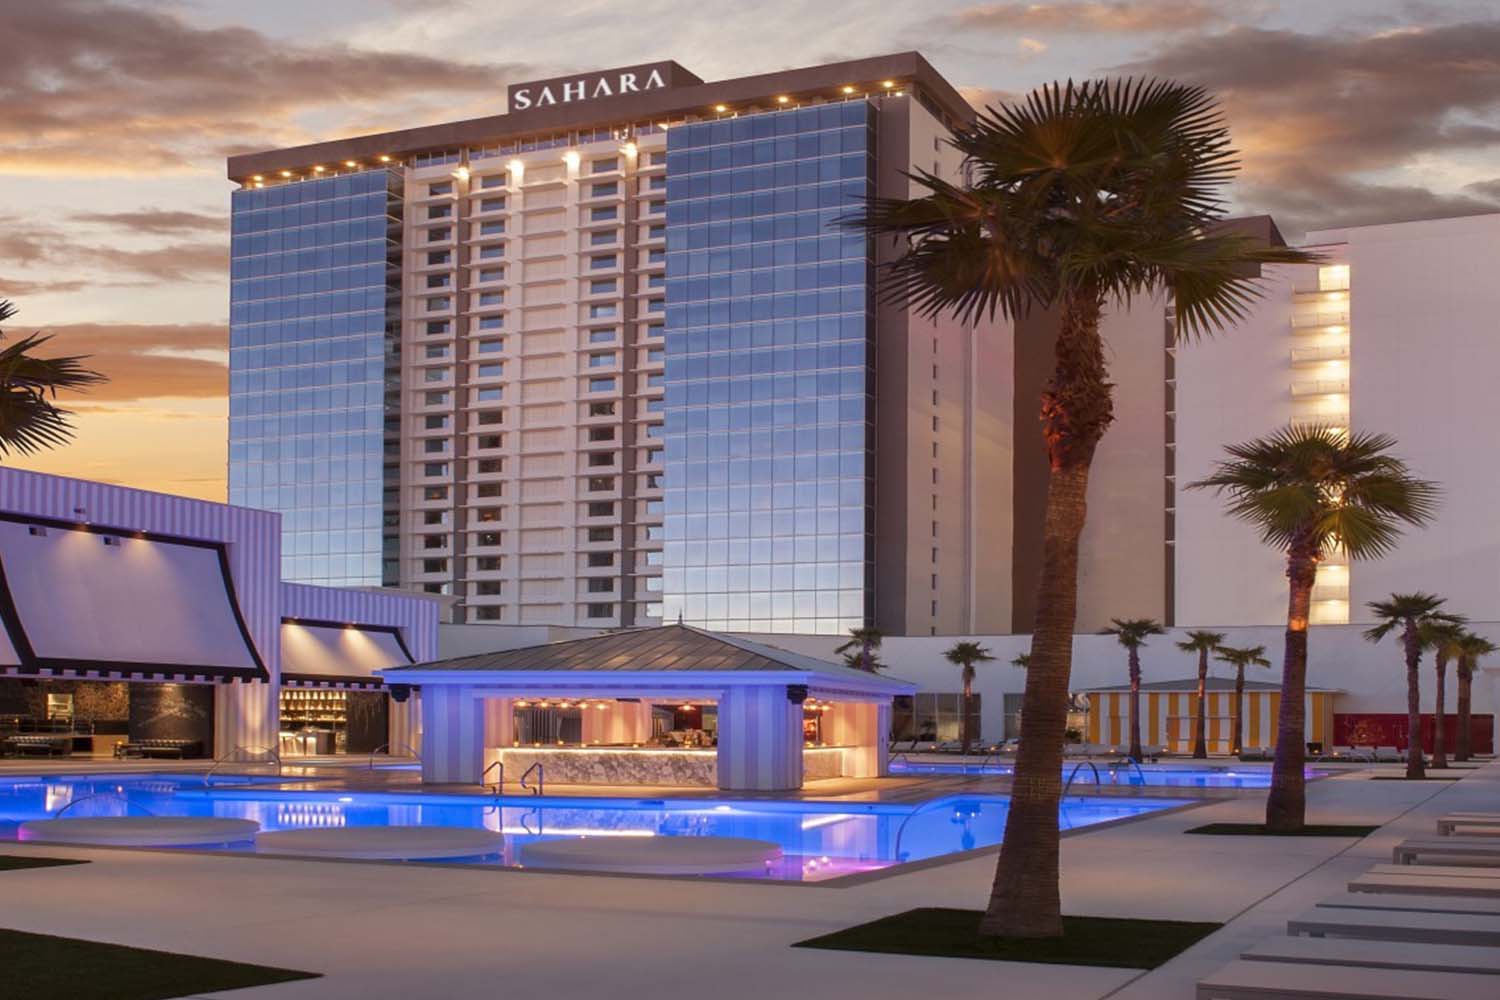 Sahara, Resorts World to offer new amenities booking system